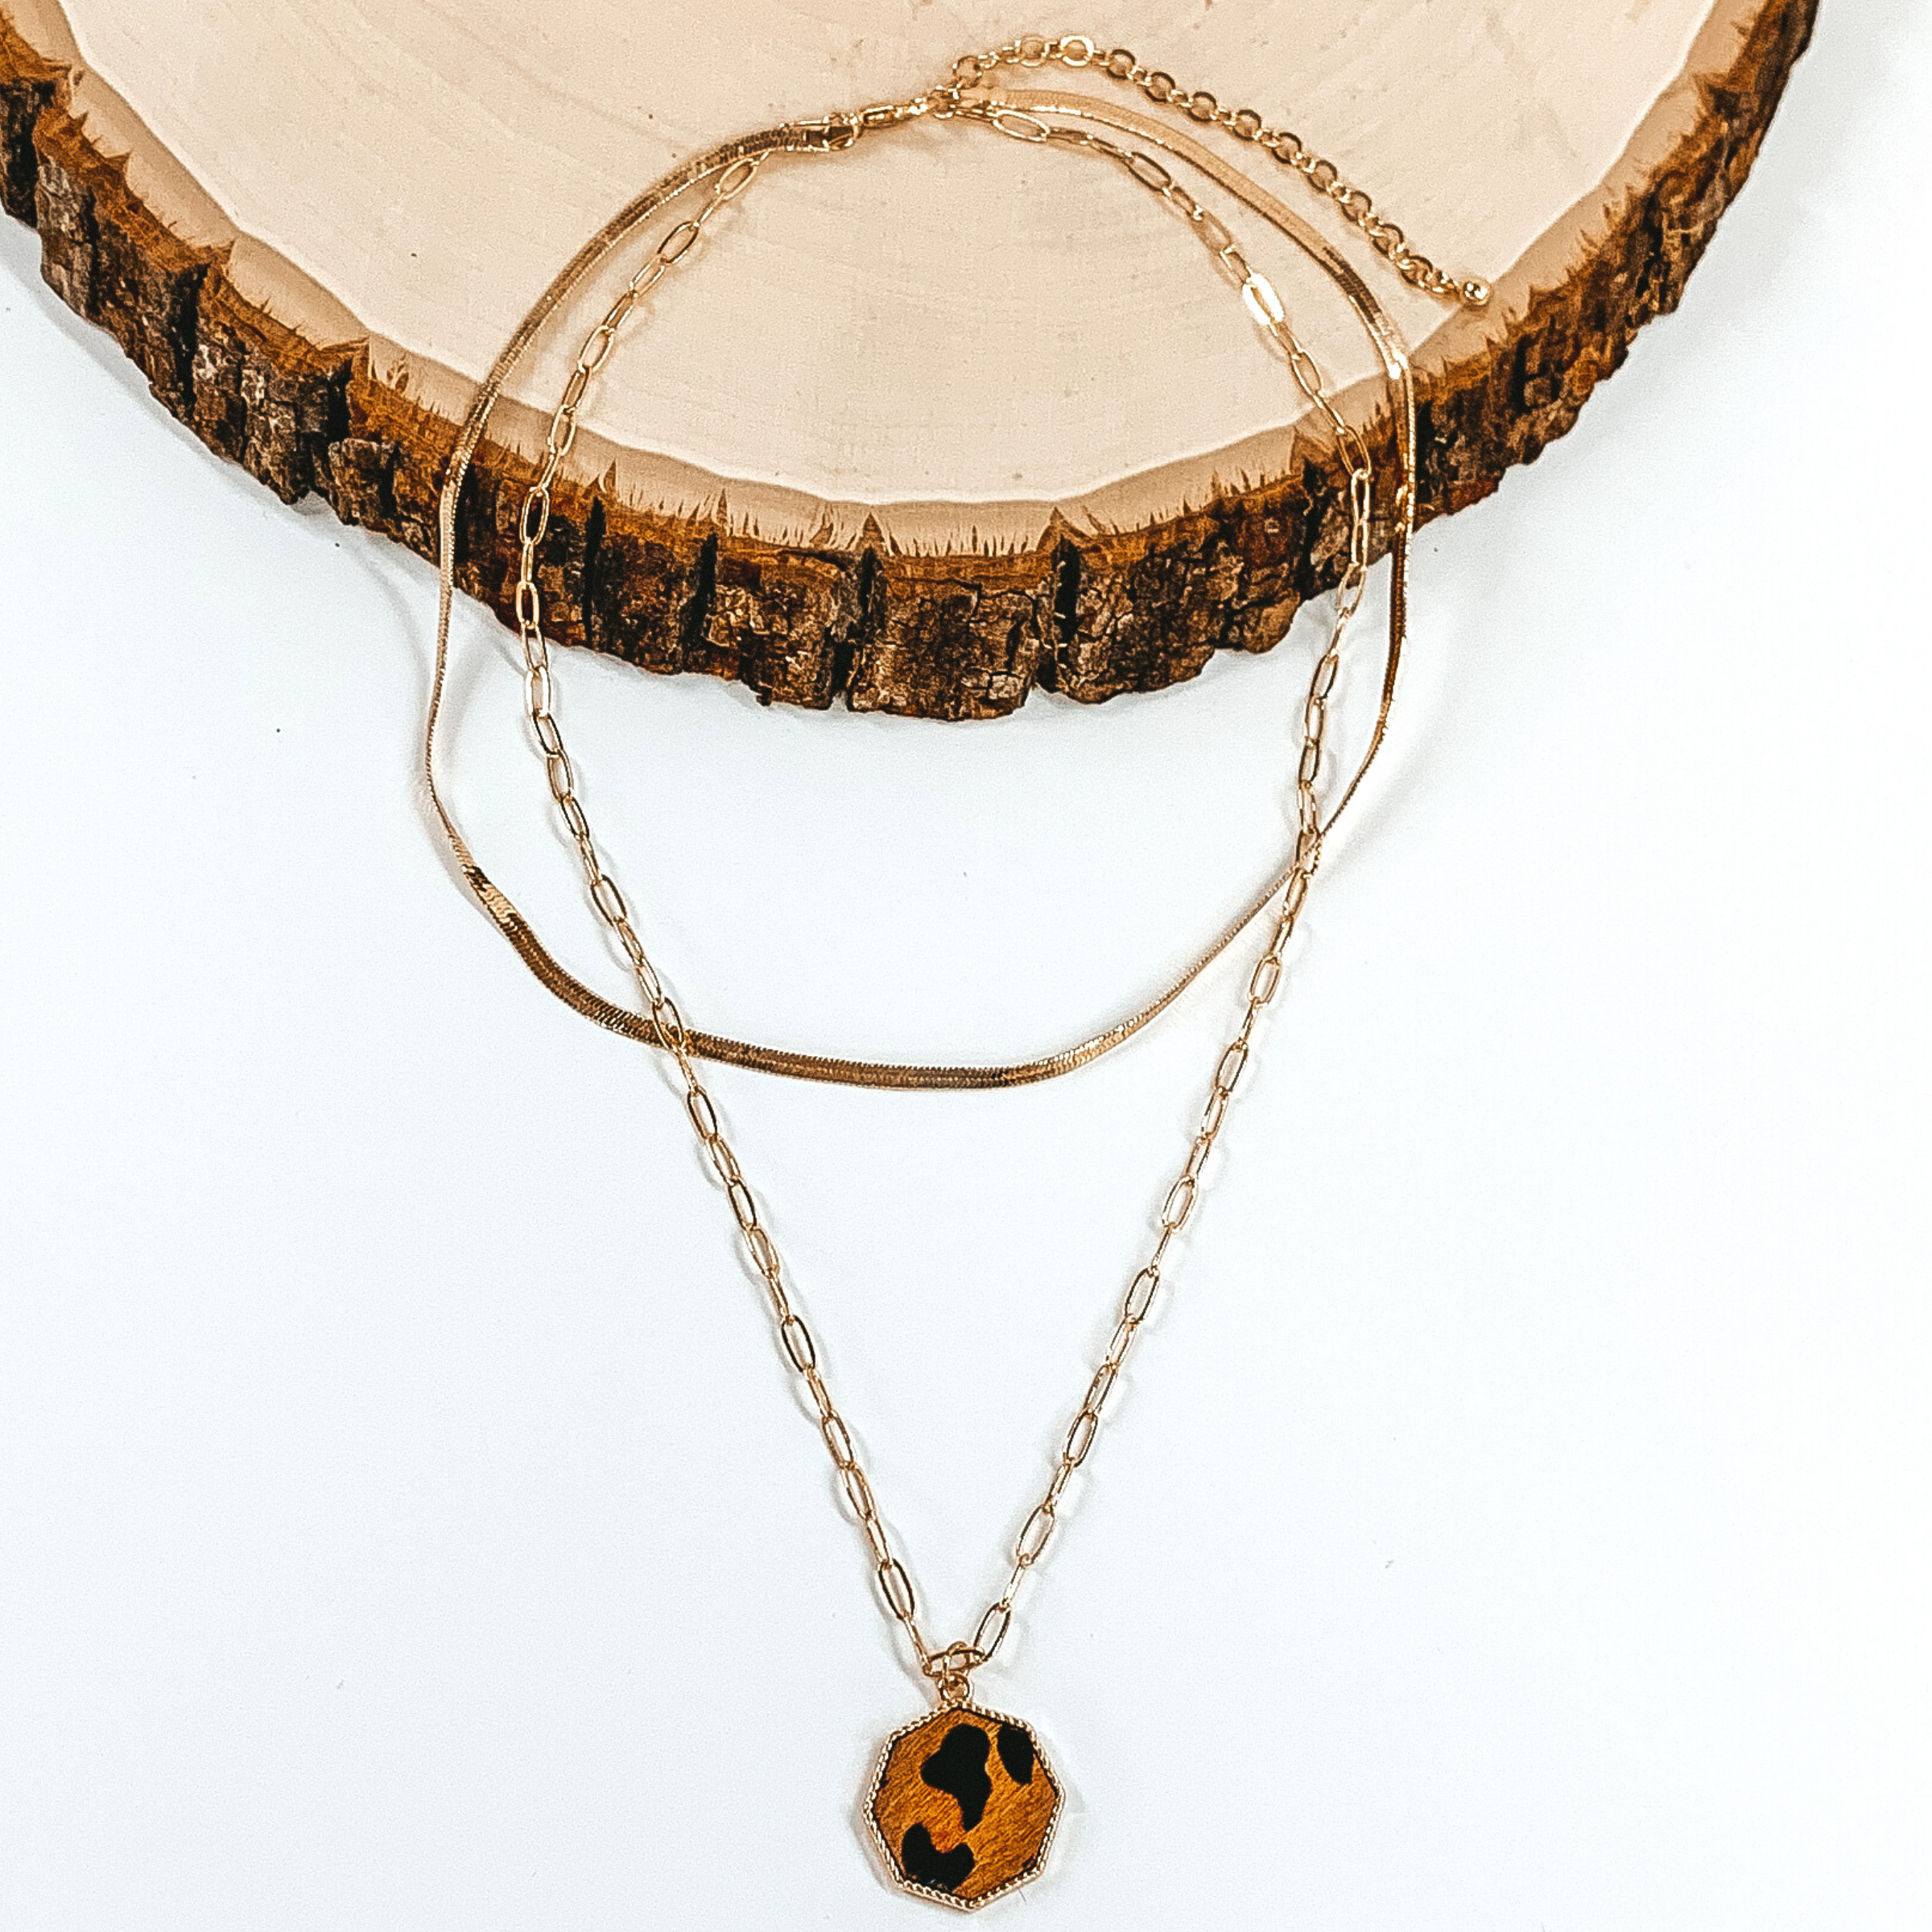 Gold paperclip doubled chain with an octagon pendant. The pendant has a brown hide inlay with an animal print. This necklace is pictured laying on a piece of wood on a white background.